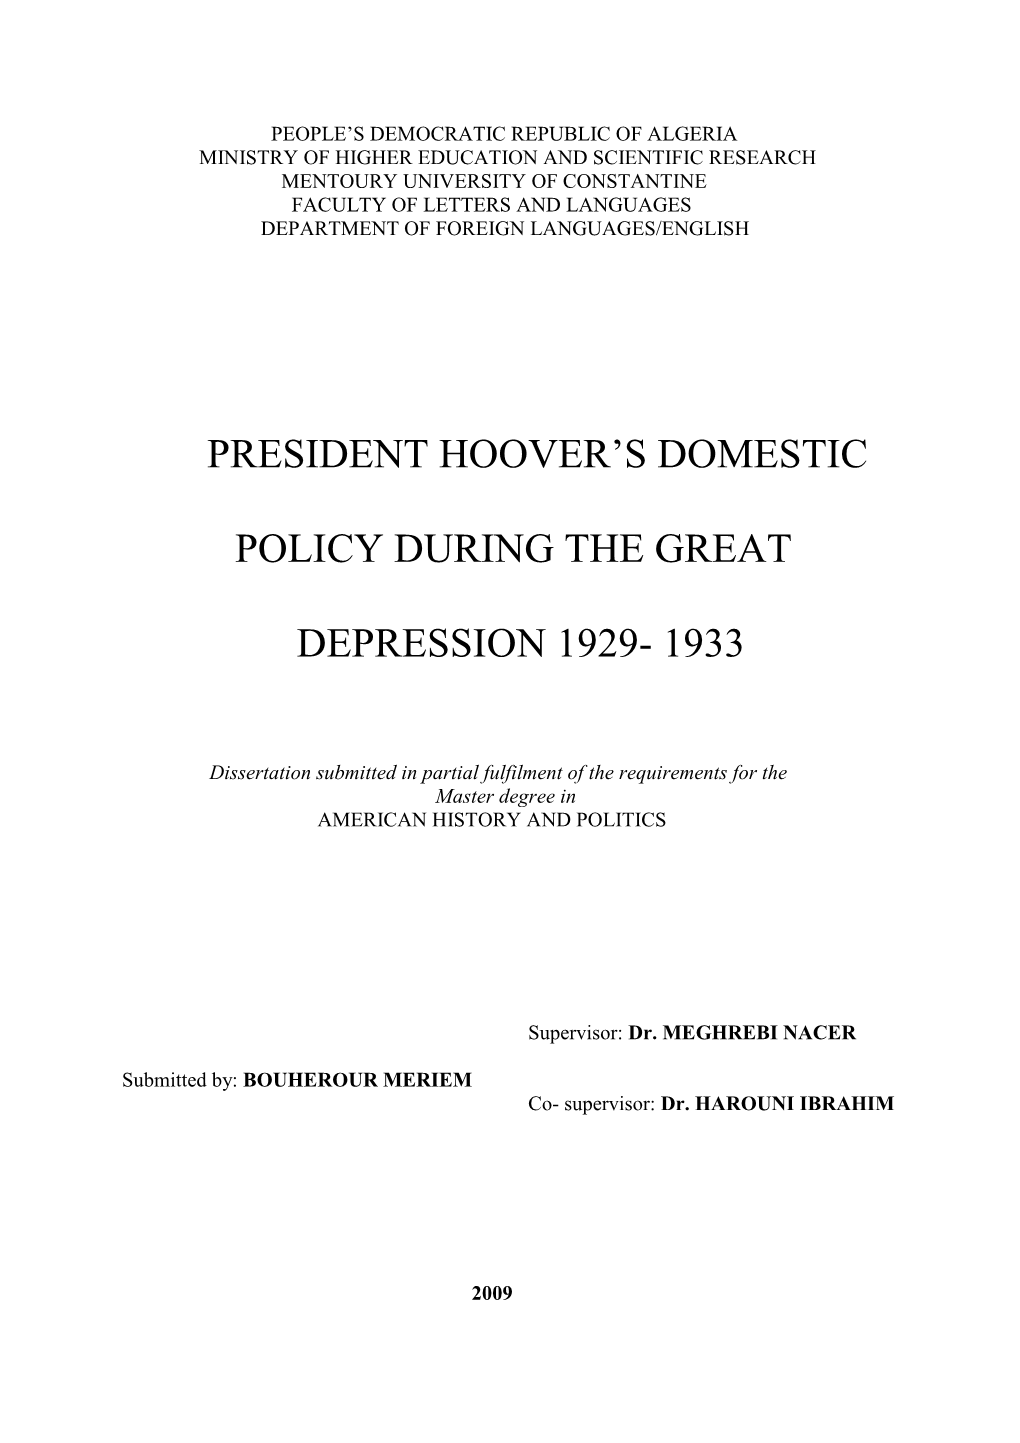 President Hoover's Domestic Policy During the Great Depression 1929- 1933